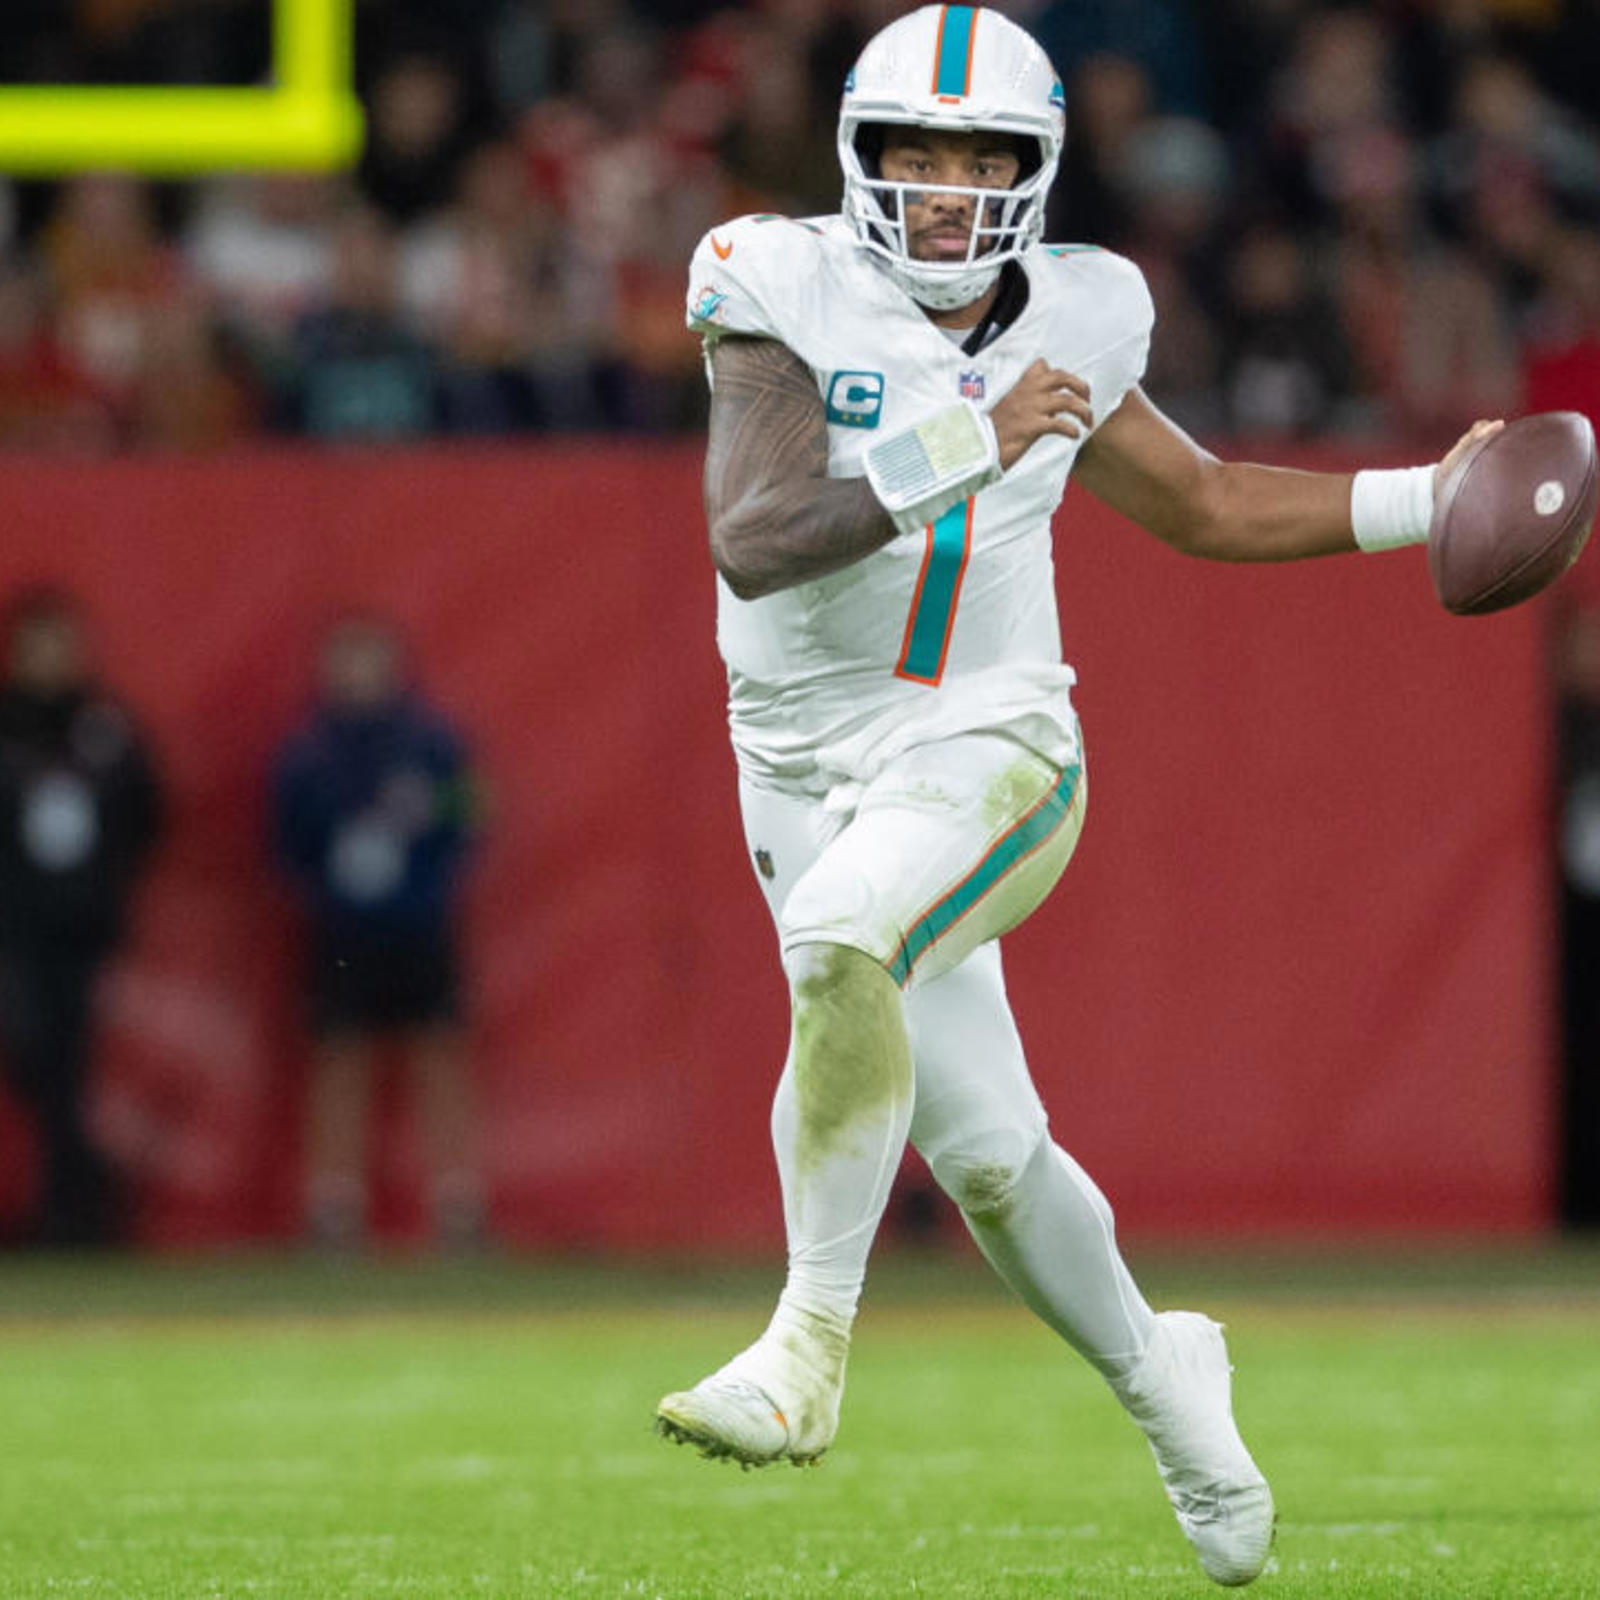 How to watch today's Miami Dolphins vs. New York Jets NFL Black Friday